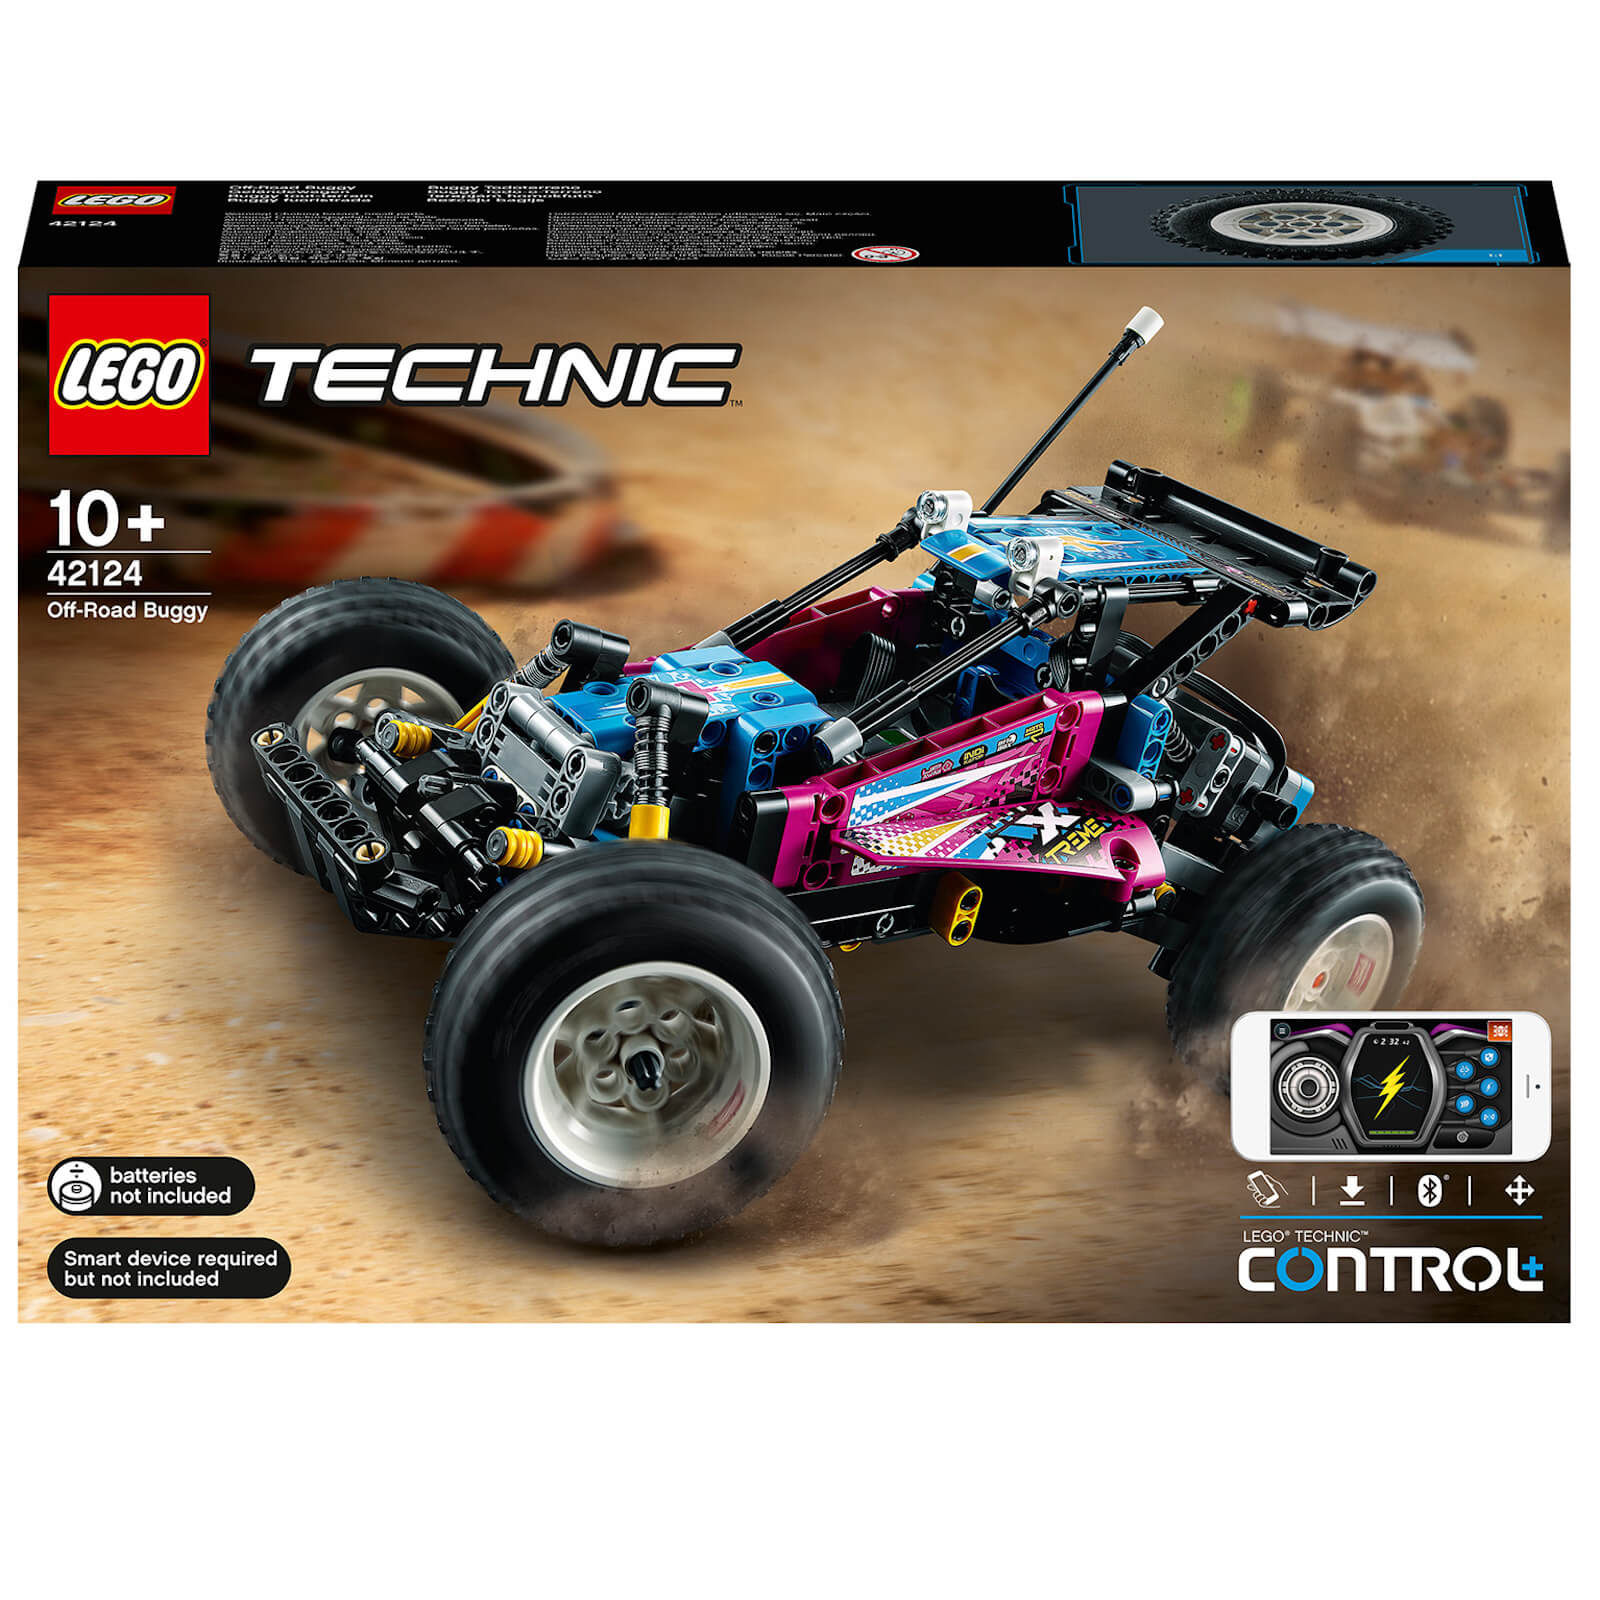 Lego Technic: Off-Road Buggy App-Controlled RC Set (42124)-male